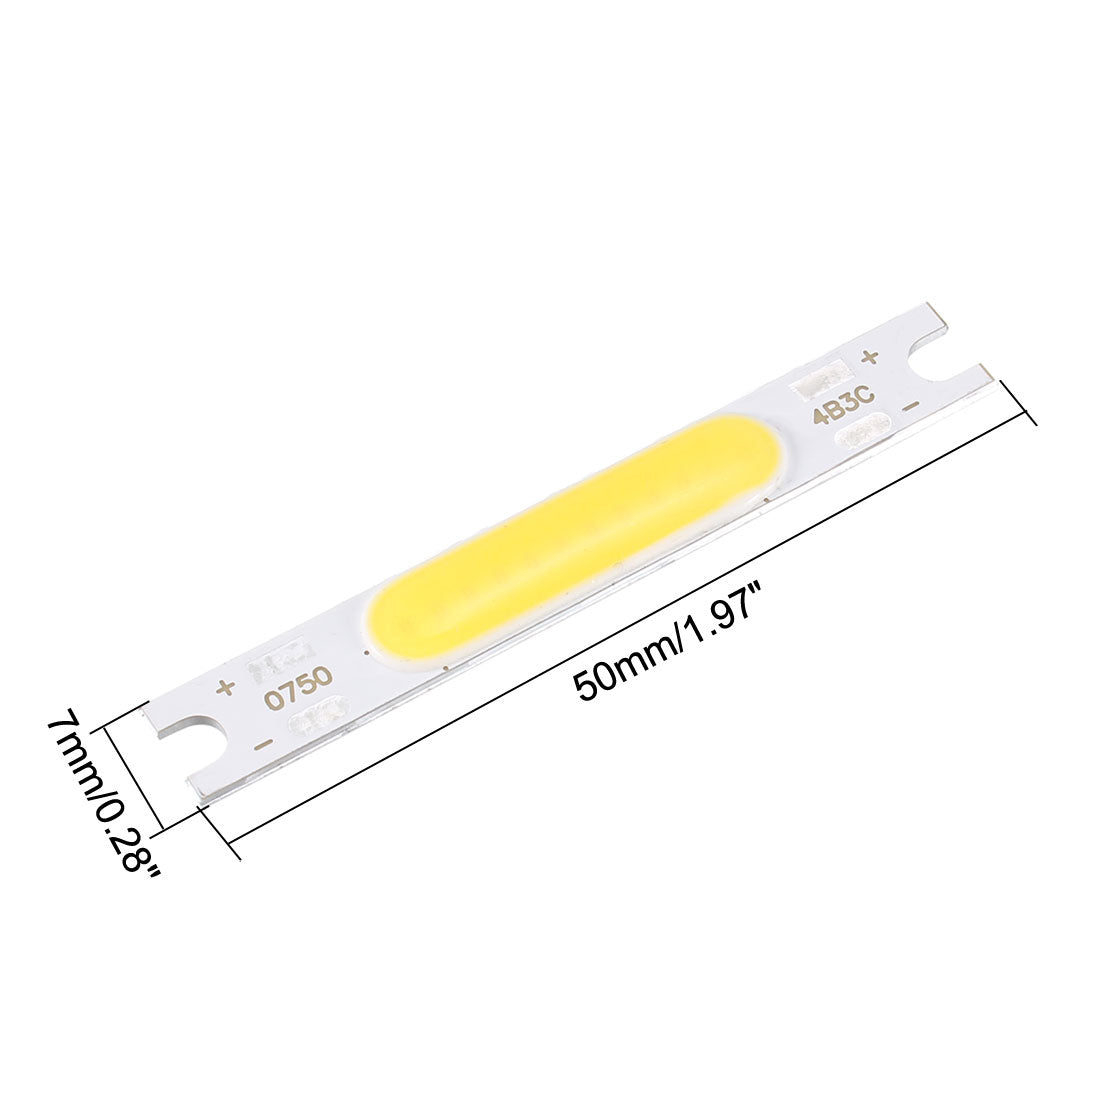 uxcell Uxcell 500mA 5W COB LED Strip Light Lamp Chip Neutral White High Power 25mmx5mm Luminous Surface